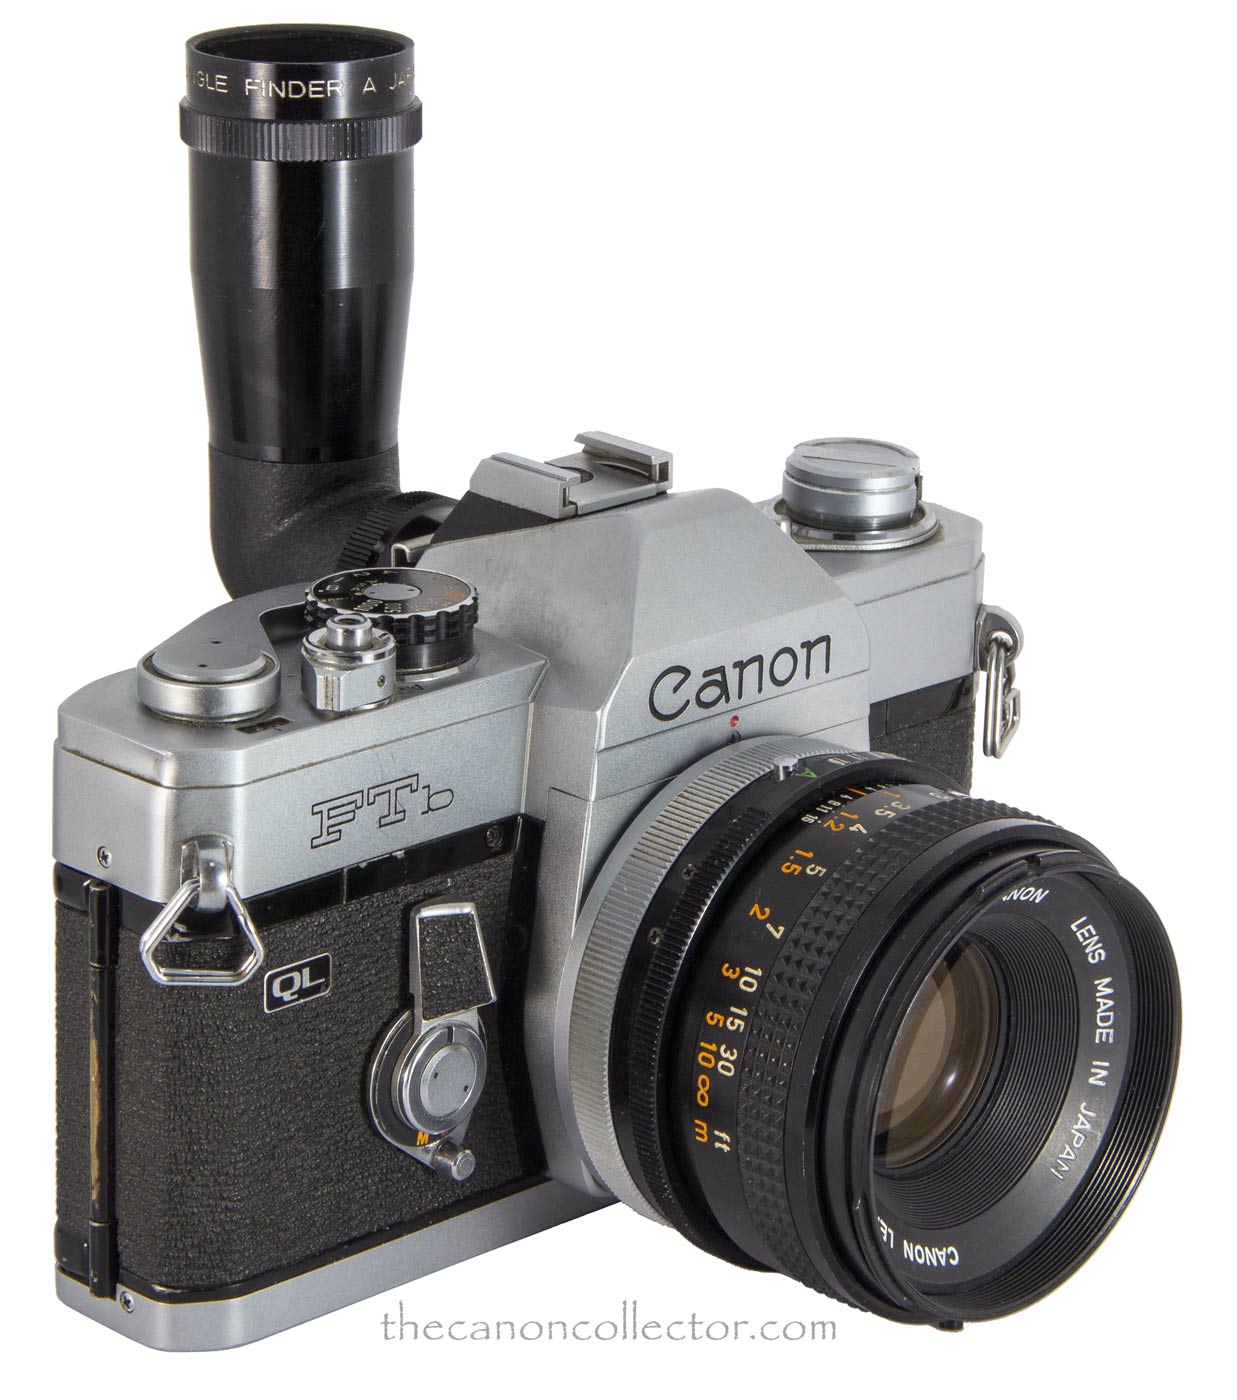 Canon Angle Finder A